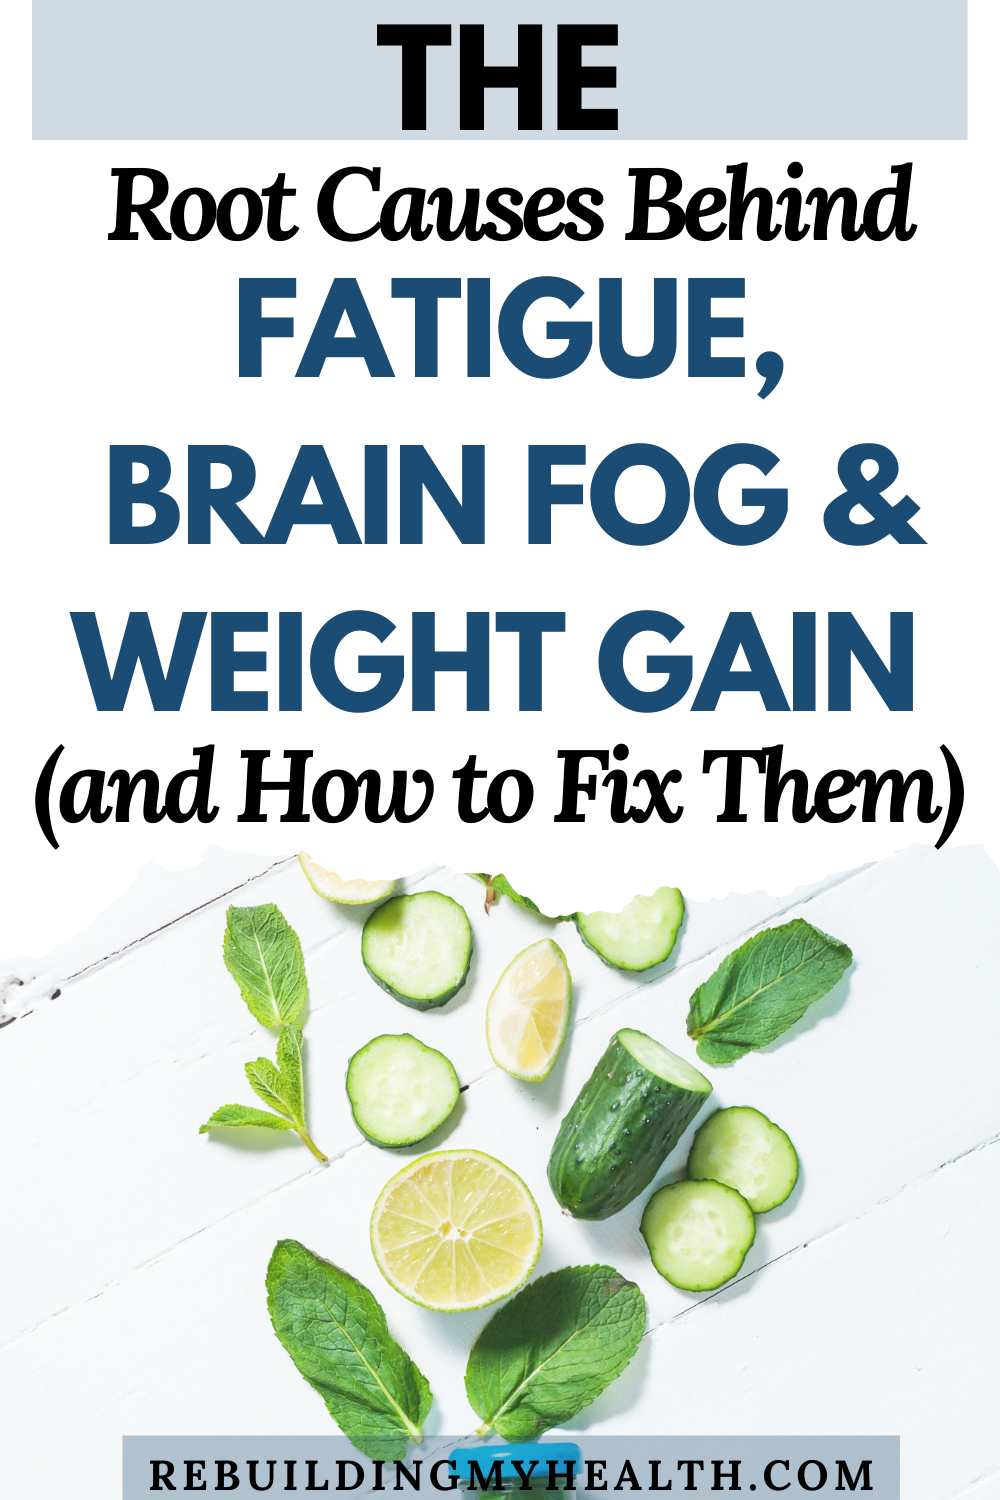 Misty found the root causes of fatigue, brain fog and rapid weight gain, and addressed them with diet, detox, hormone balancing, gut healing and more. ventional medicine.